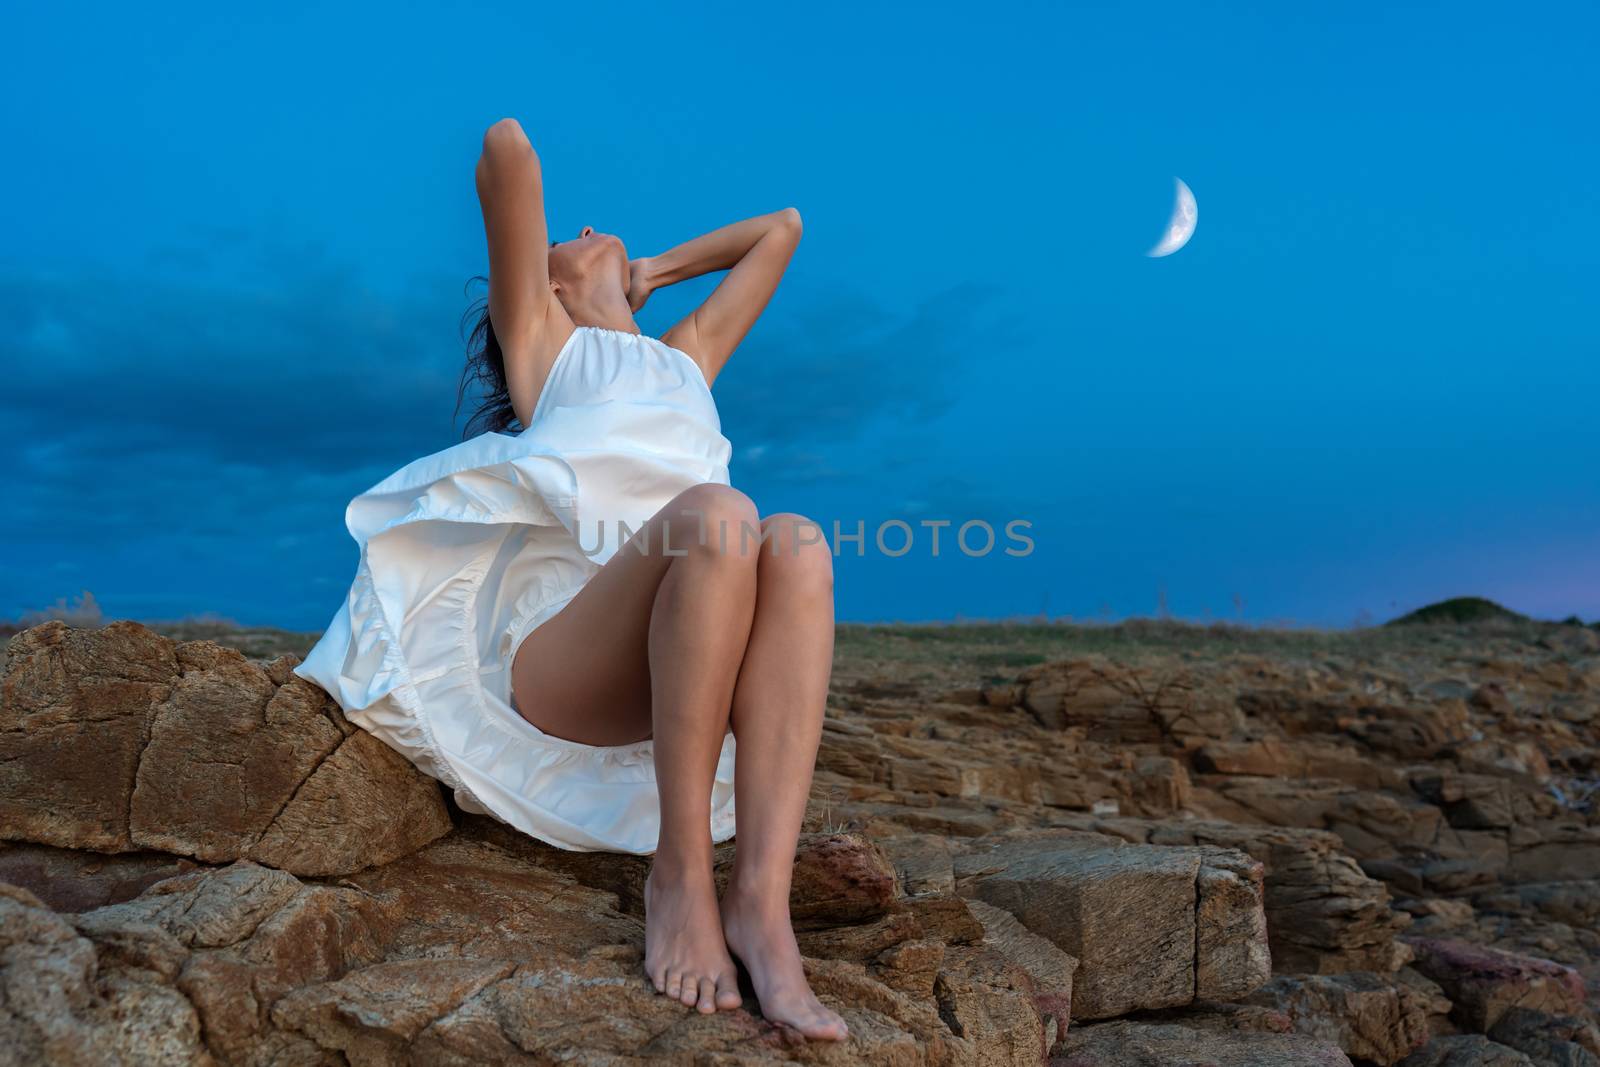 Romance fantasy scene with a beautiful young woman holding her h by robbyfontanesi